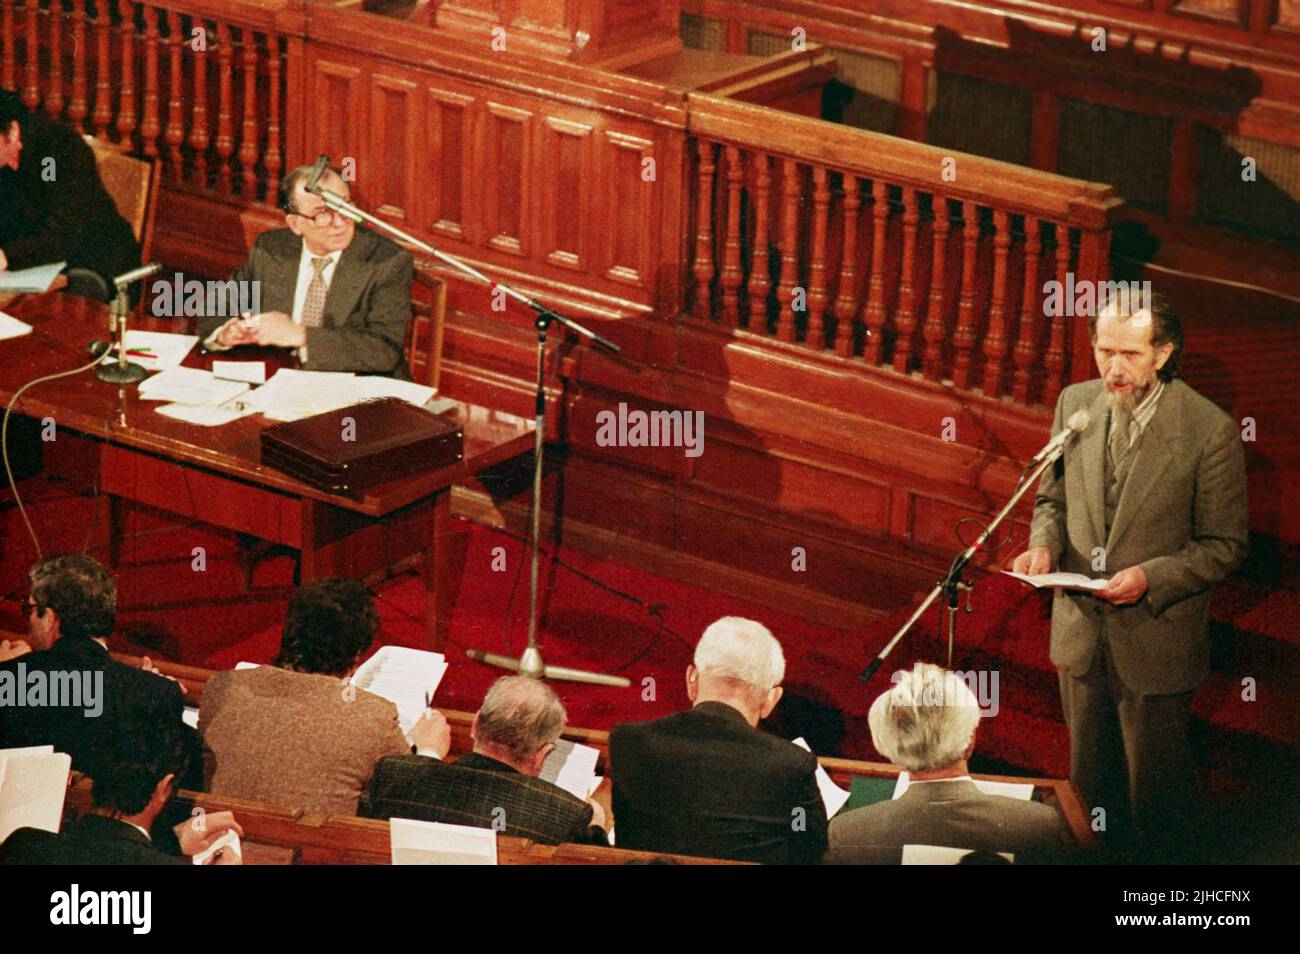 Bucharest, Romania, 1990. The Romanian writer and politician Toma George Maiorescu speaking in the Romanian Parliament as the leader of the newly formed party M.E.R. Presiding the session, Ion Iliescu, provisional president of Romania right after the Romanian Revolution of 1989. Stock Photo